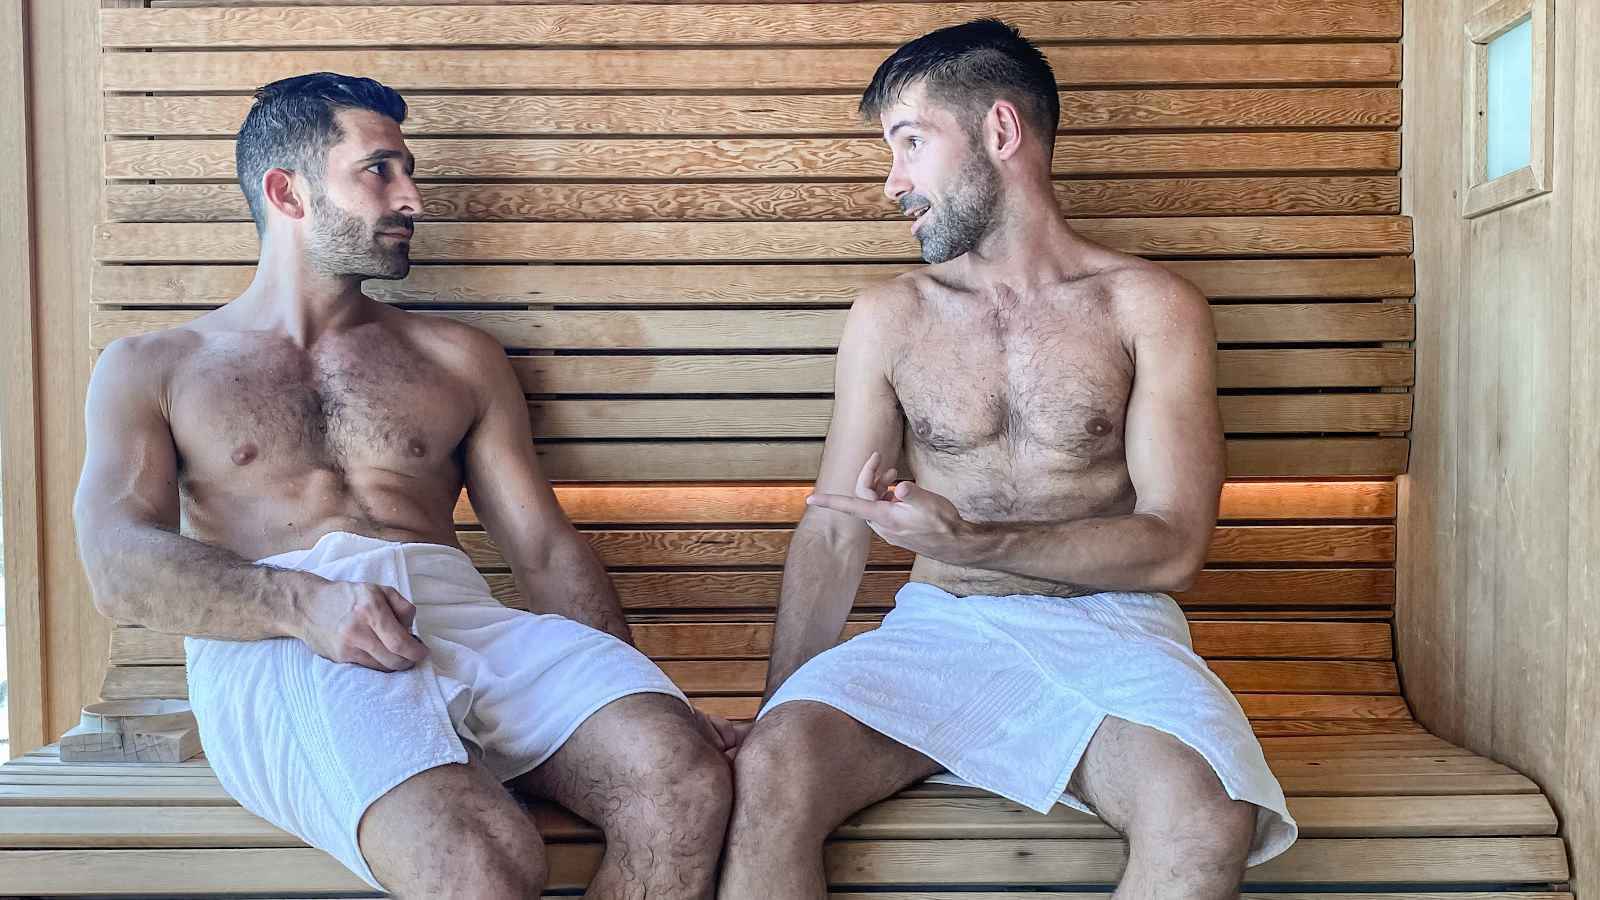 There are some great gay saunas in Shanghai for relaxation and fun